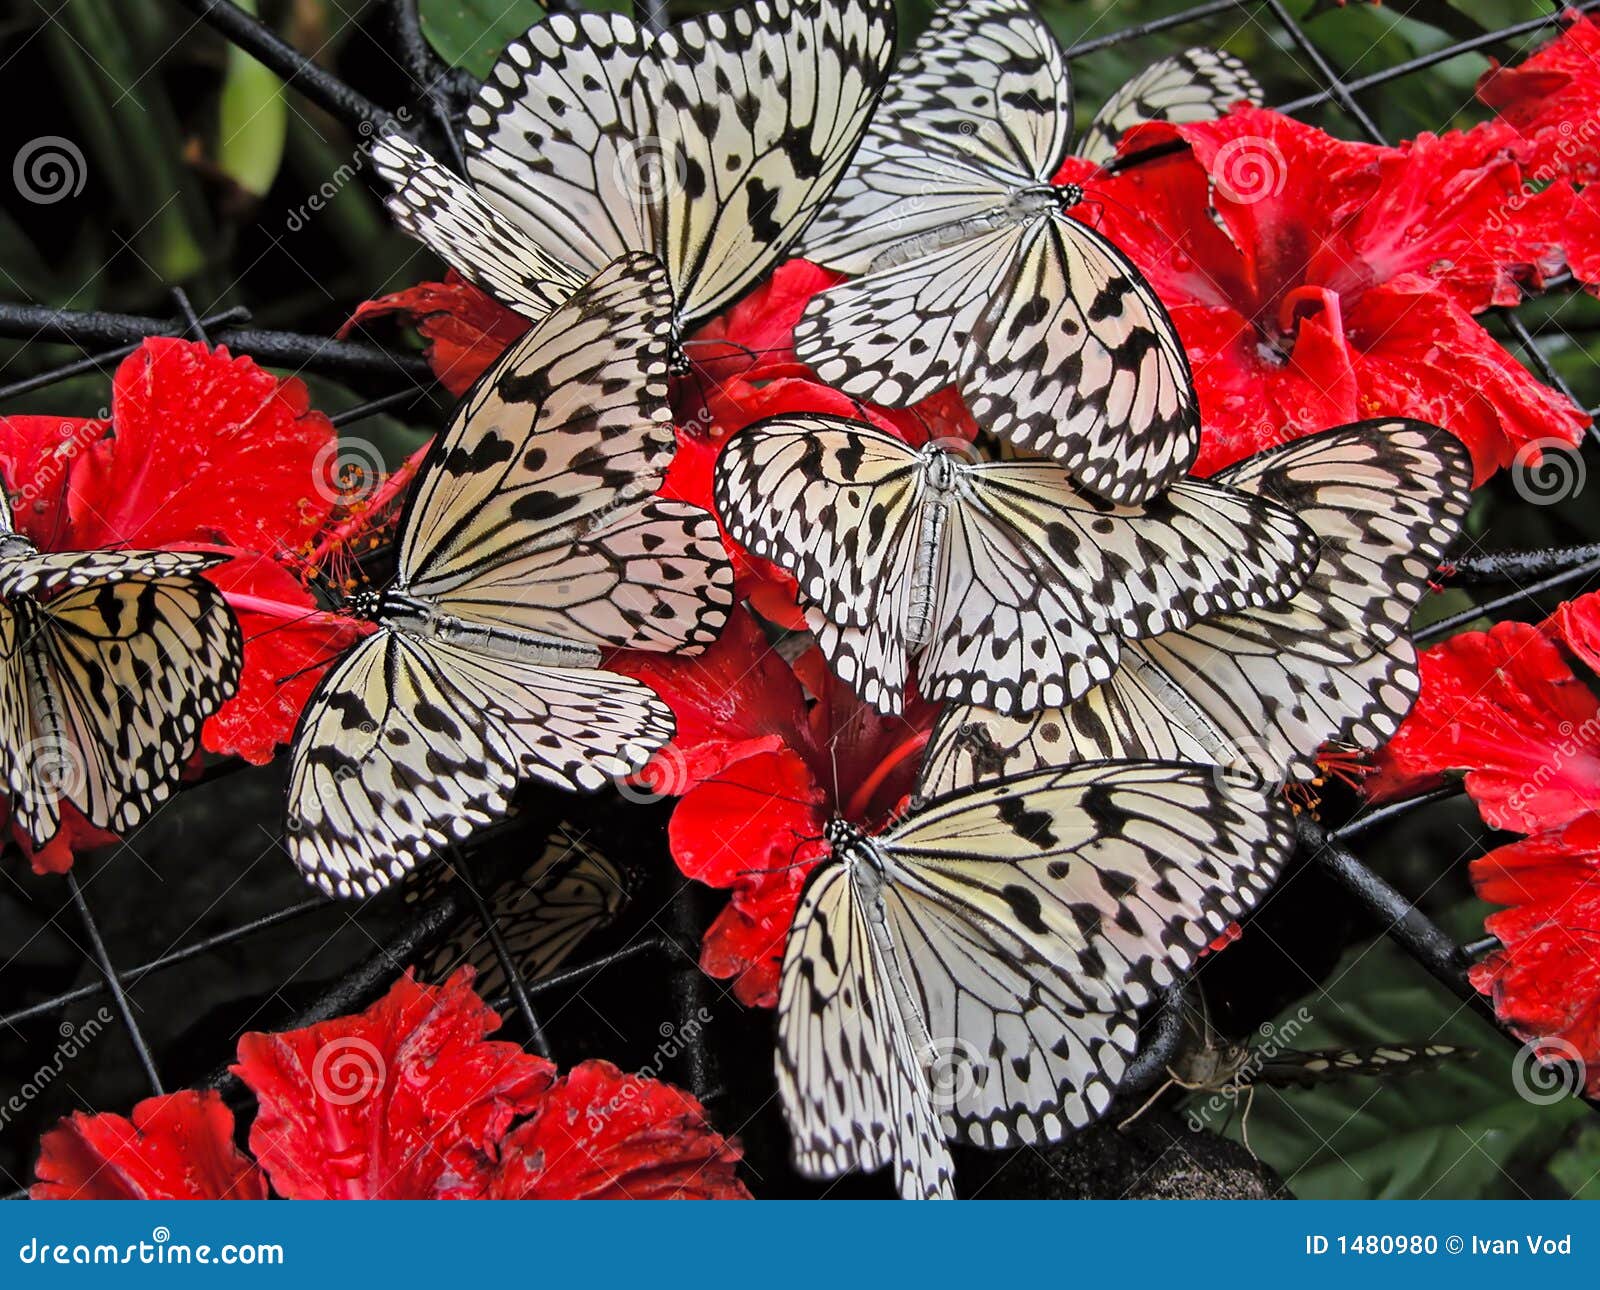 several white butterflies on red flowers